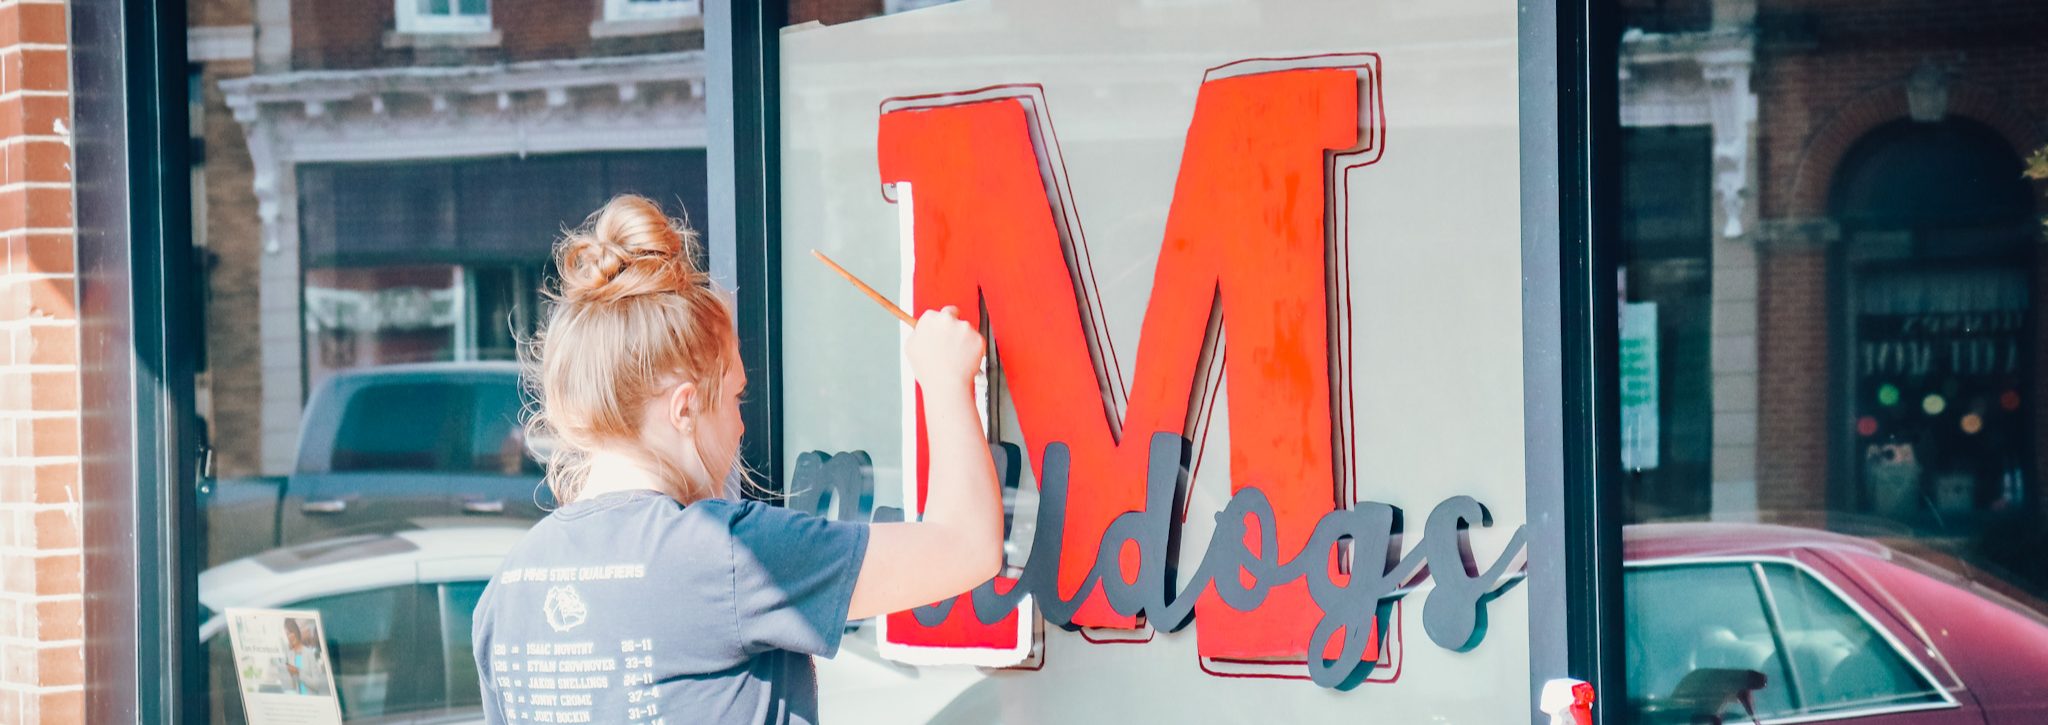 individual painting letter M logo on small business window